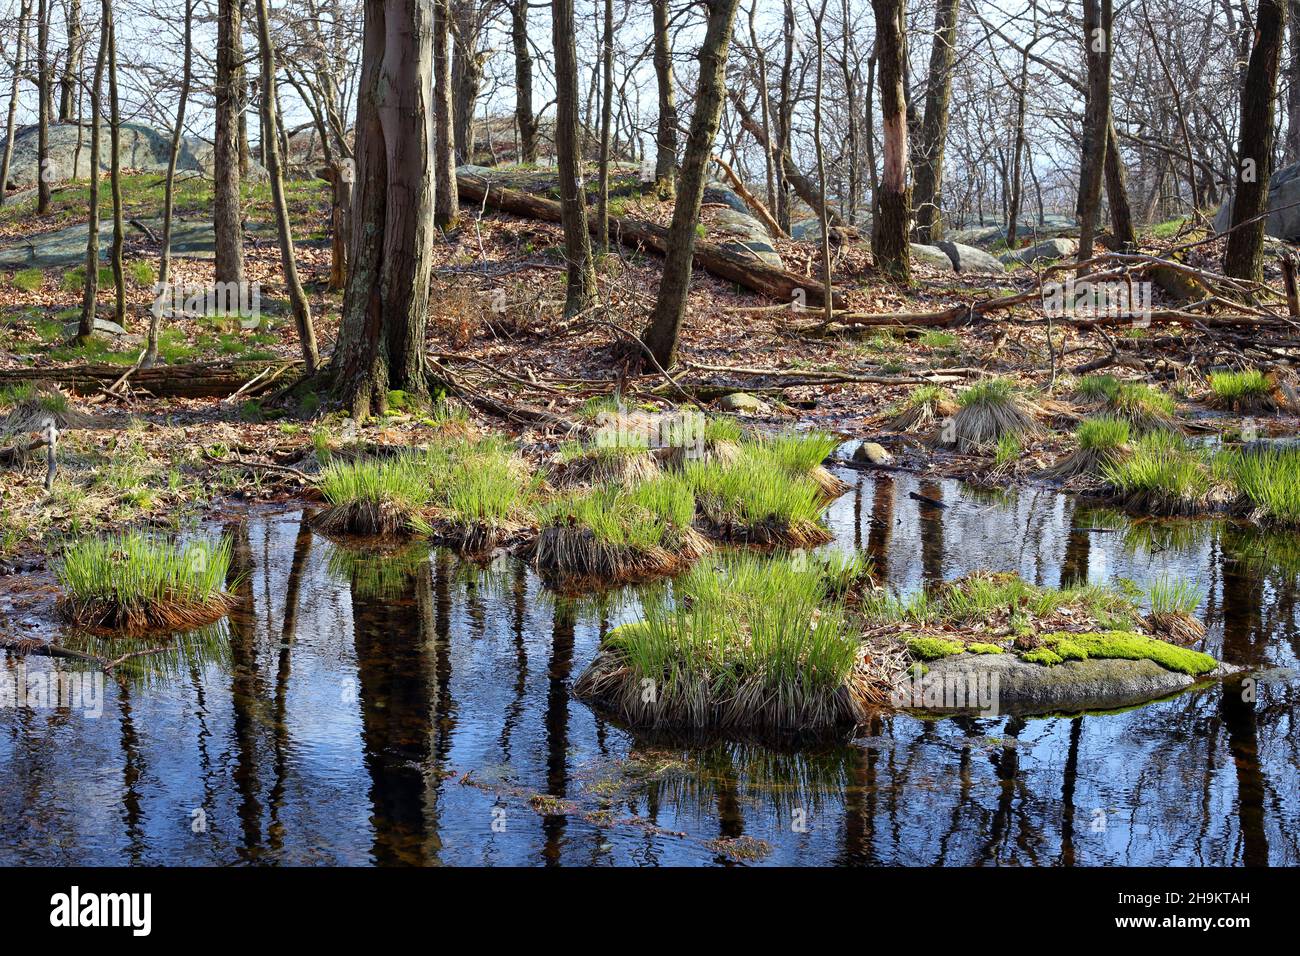 A wetland area with sedges, grass, and moss growing on rocks inside a forest in Hudson Highlands State Park, New York. Stock Photo